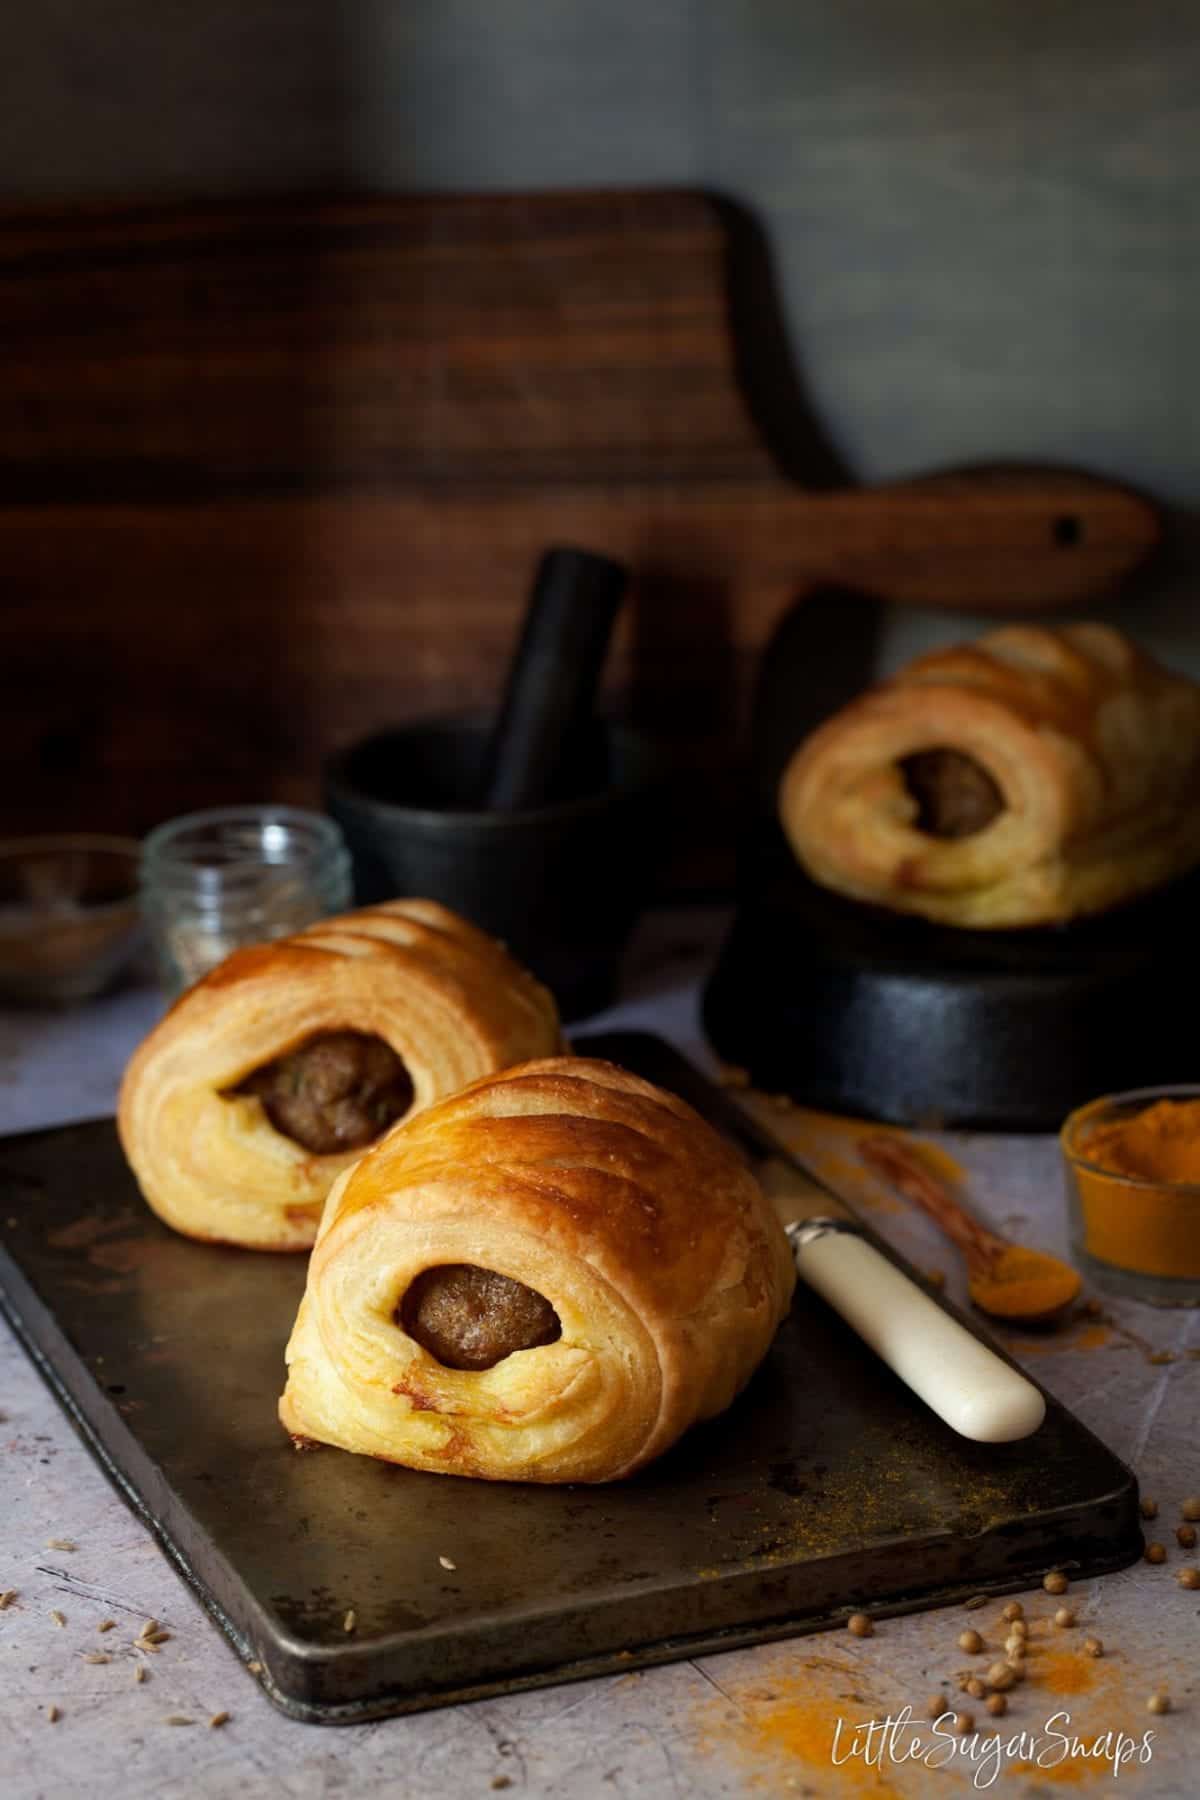 Lamb pastry rolls on a small baking tin.